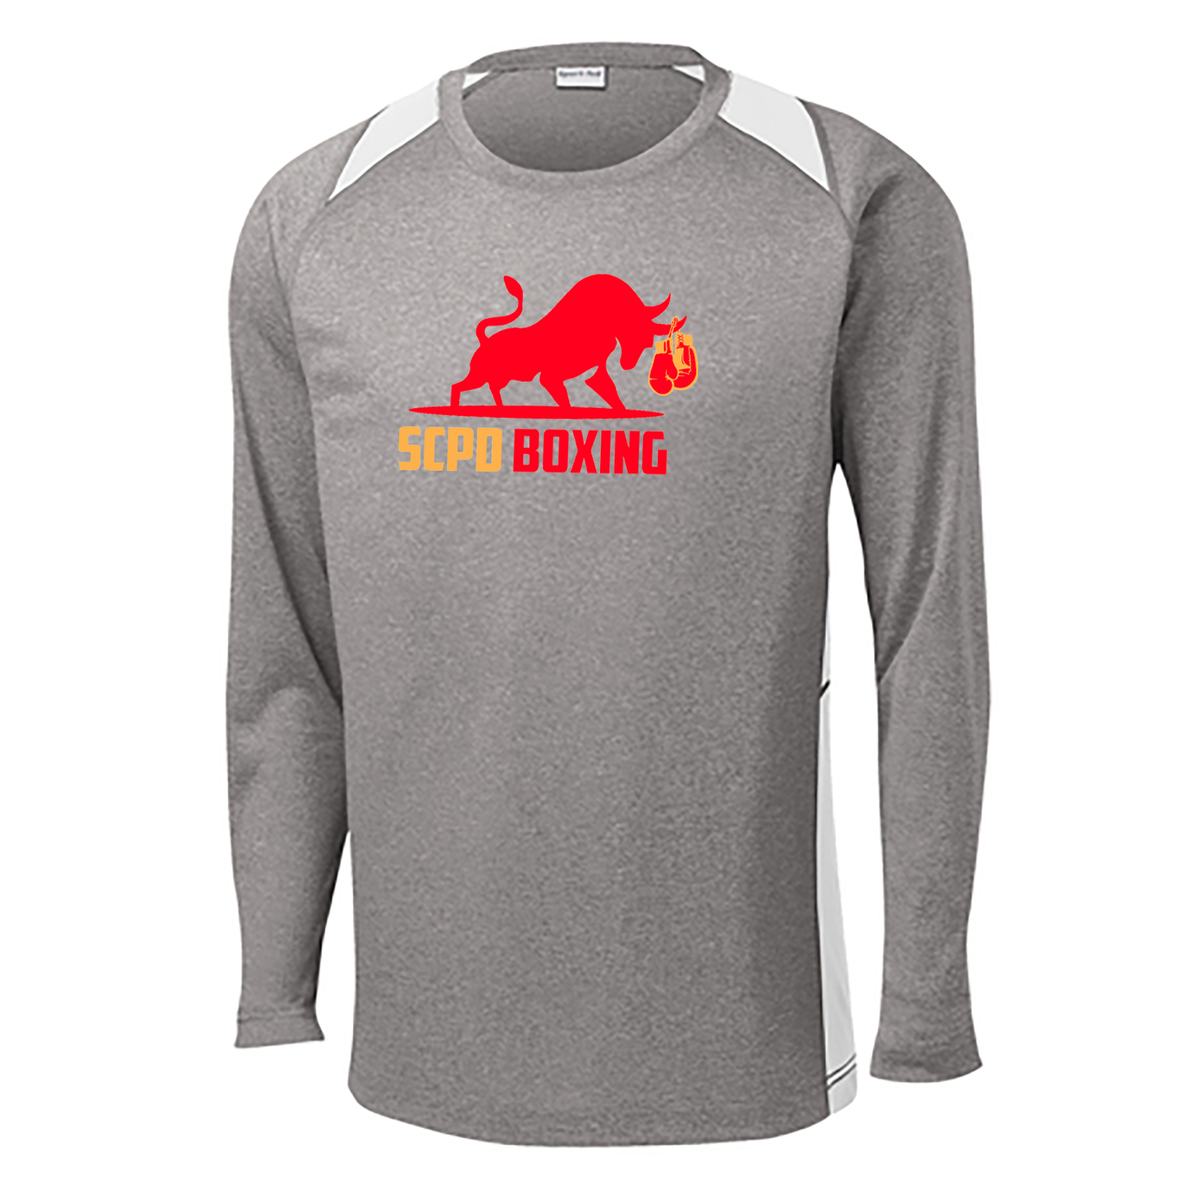 SCPD Boxing Long Sleeve Colorblock Contender Tee